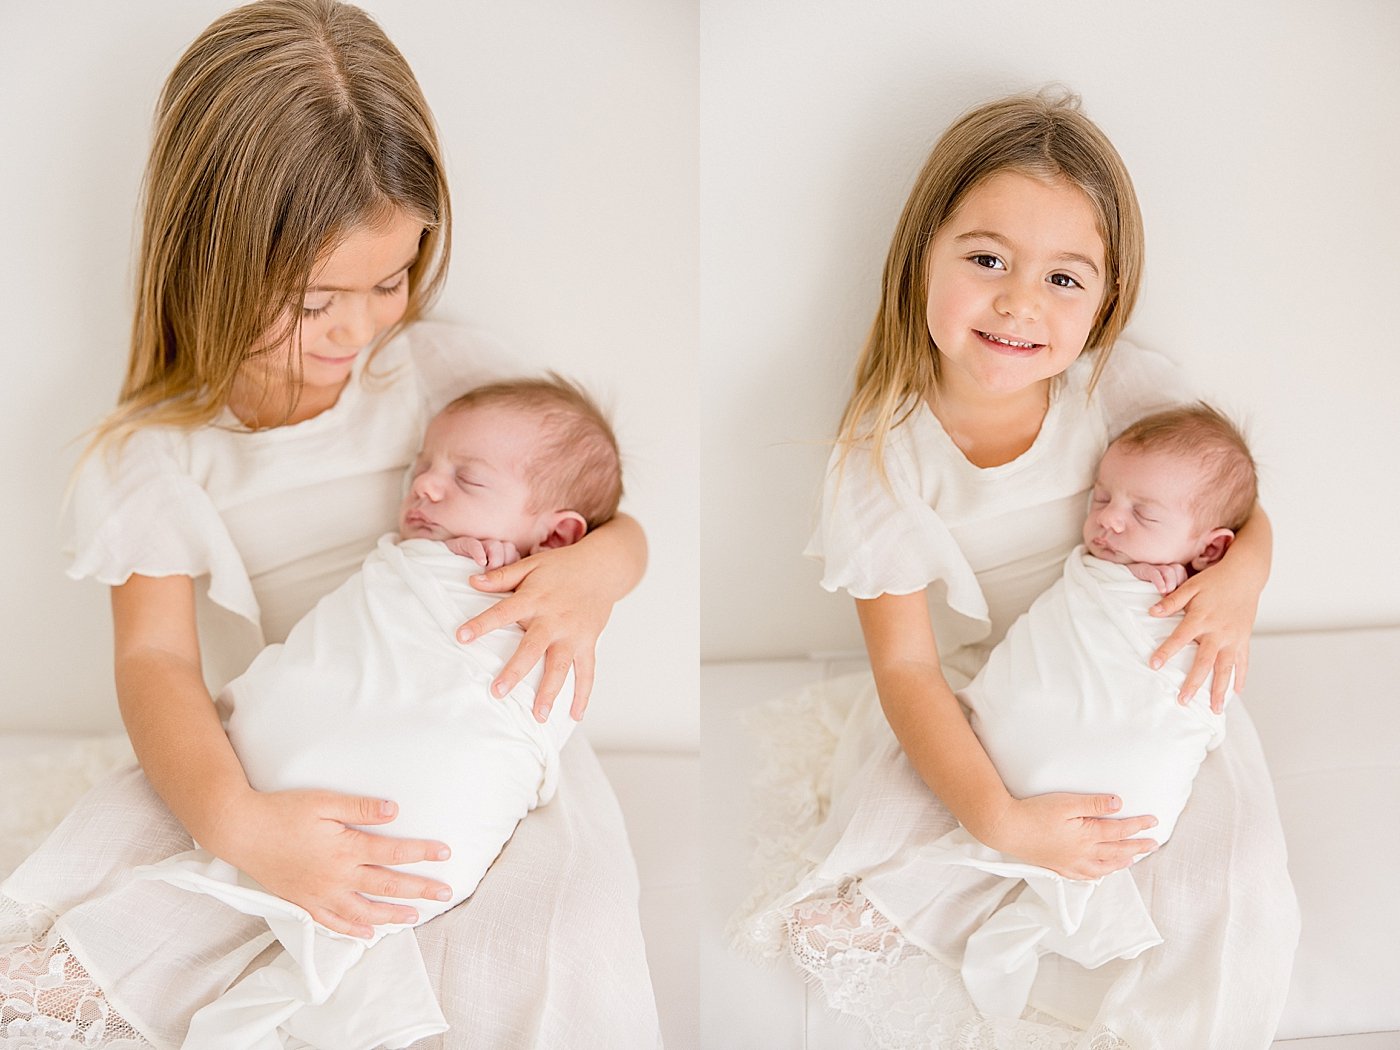 Sister and Baby Boy Portrait Session | Ambre Williams Photography